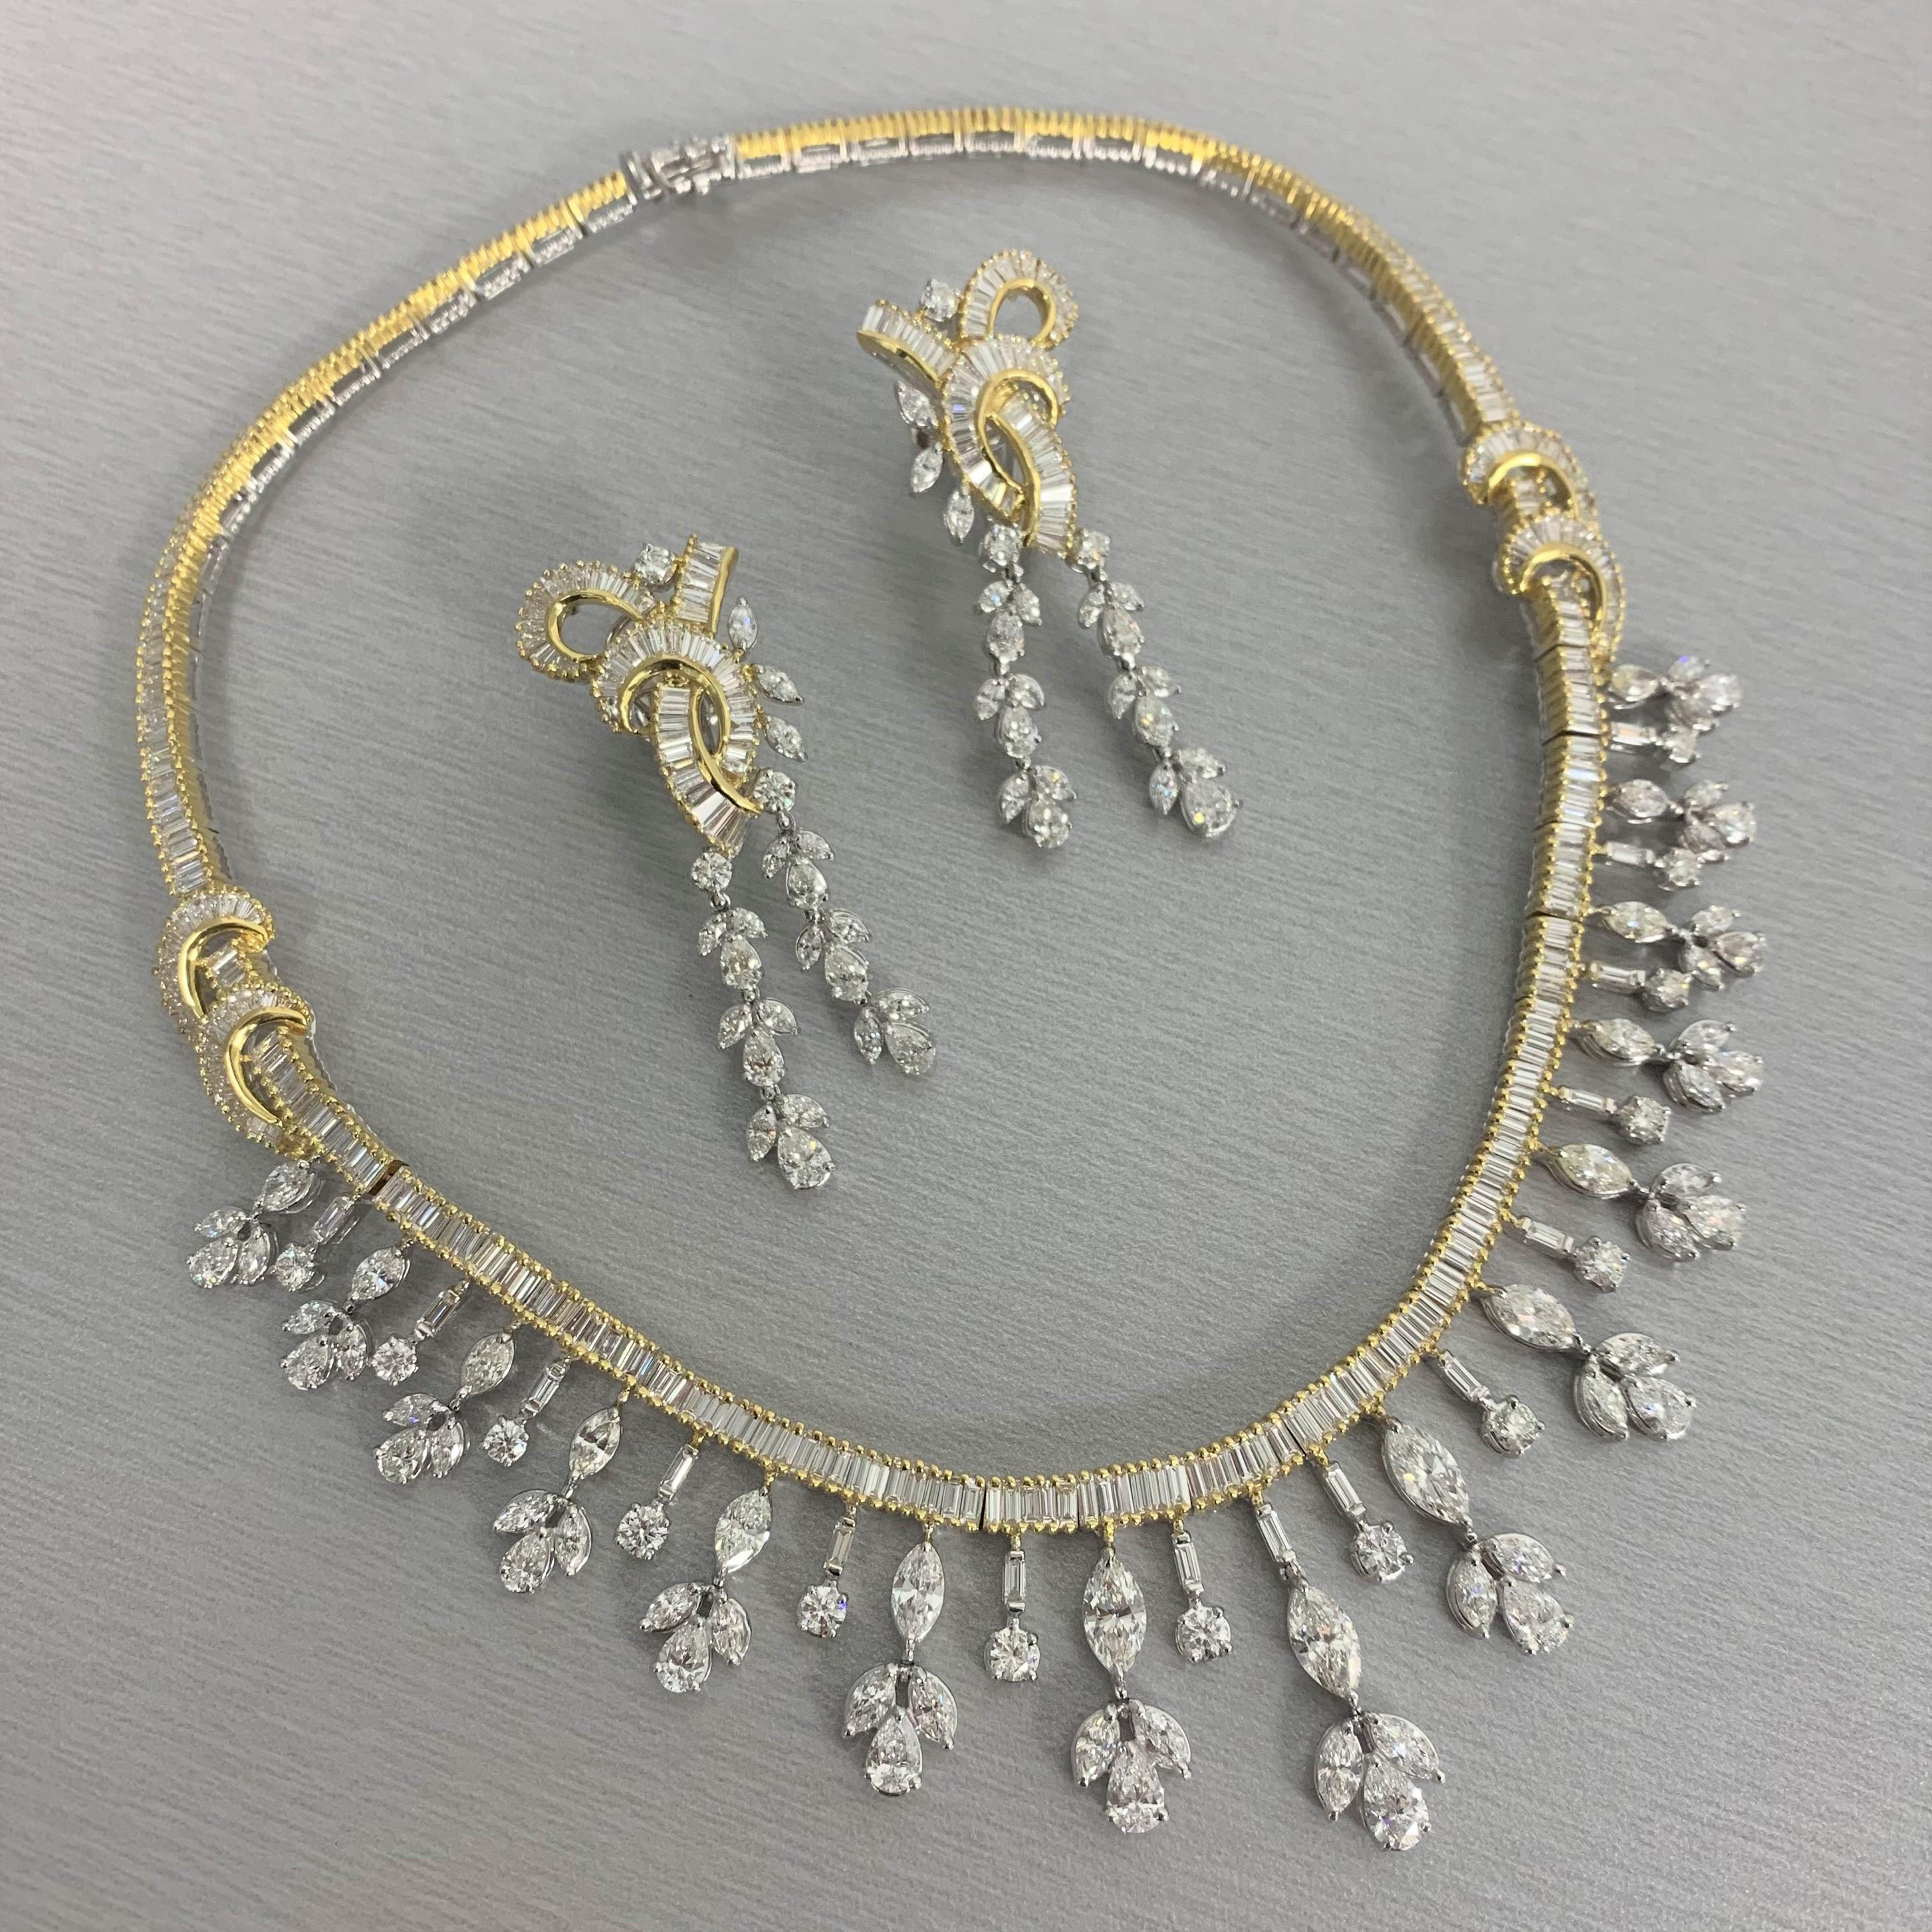 Contemporary Beauvince Scintilla Necklace and Earrings Suite 37.34 carat Diamonds in Gold